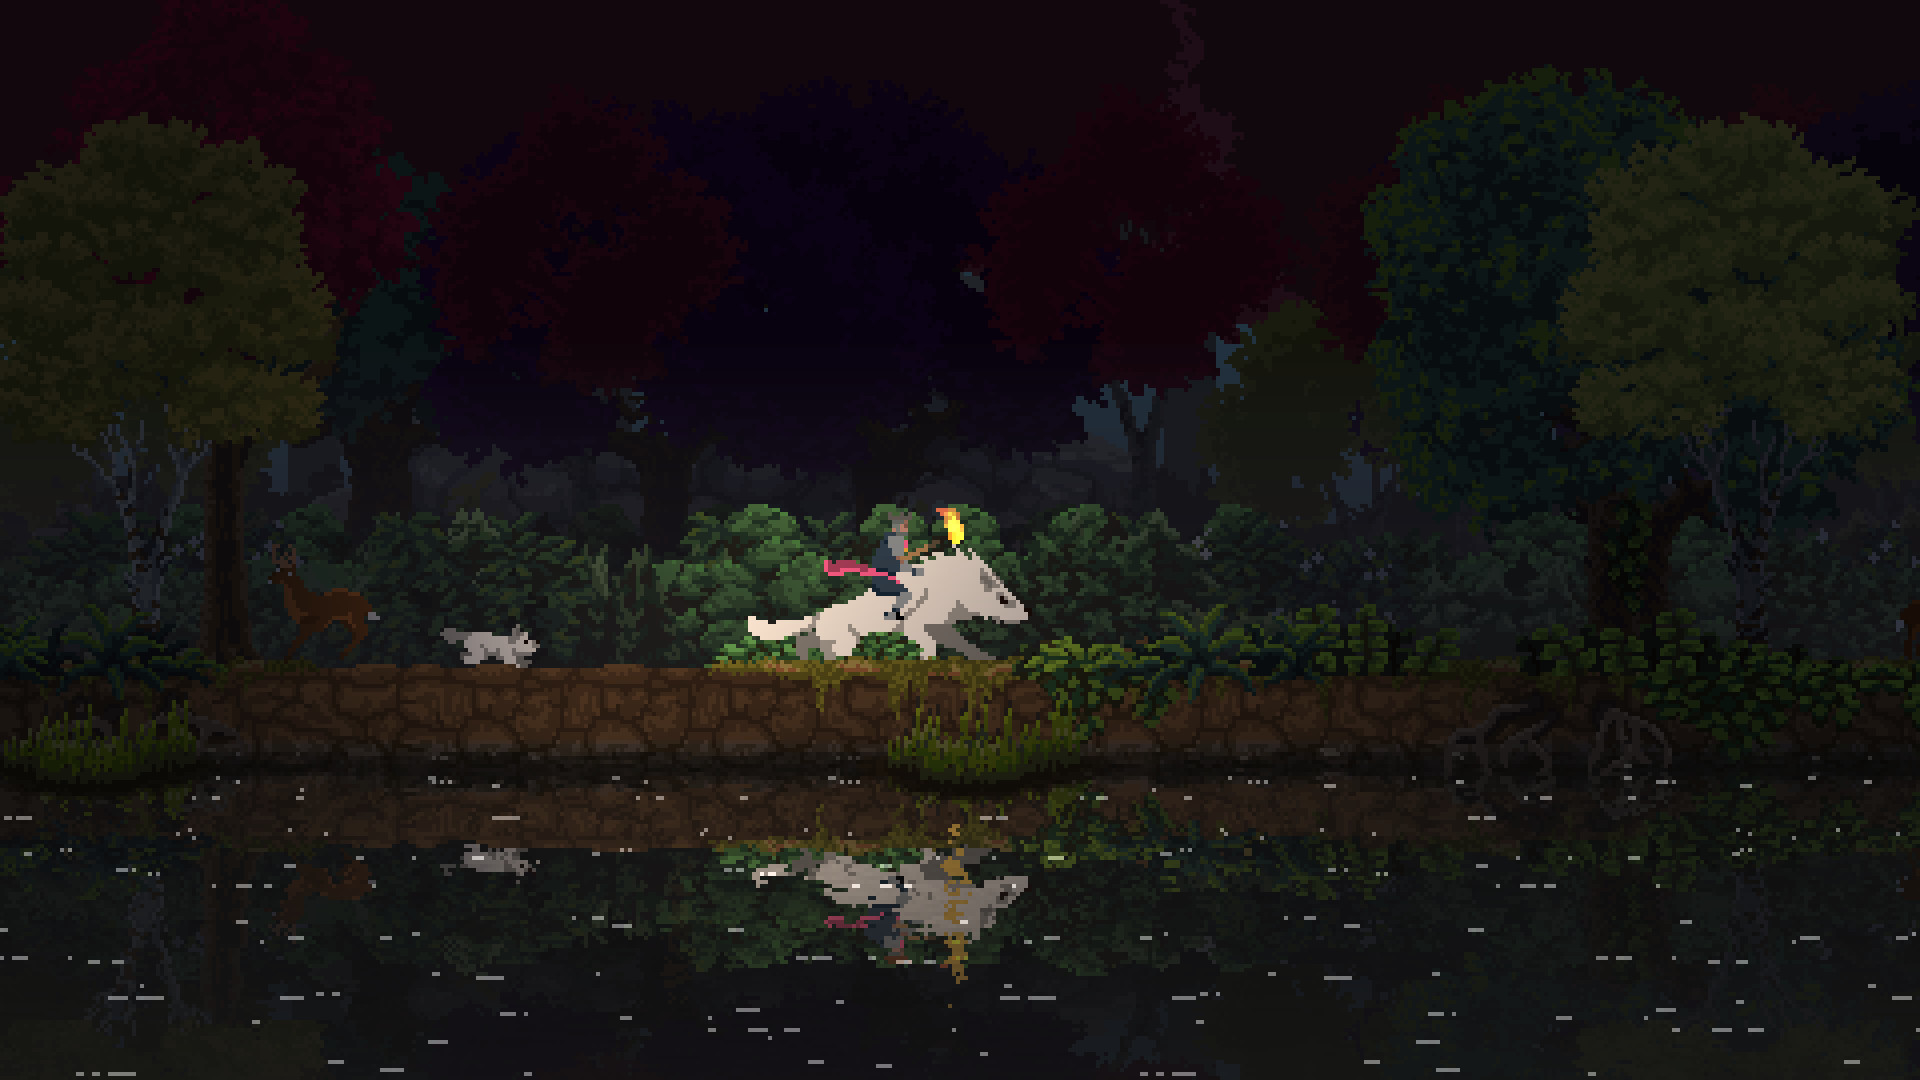 Best mobile strategy games: Kingdom Two Crowns. Image shows somebody riding a wolf near a river, with a pig not far behind, all rendered in a pixel art style.